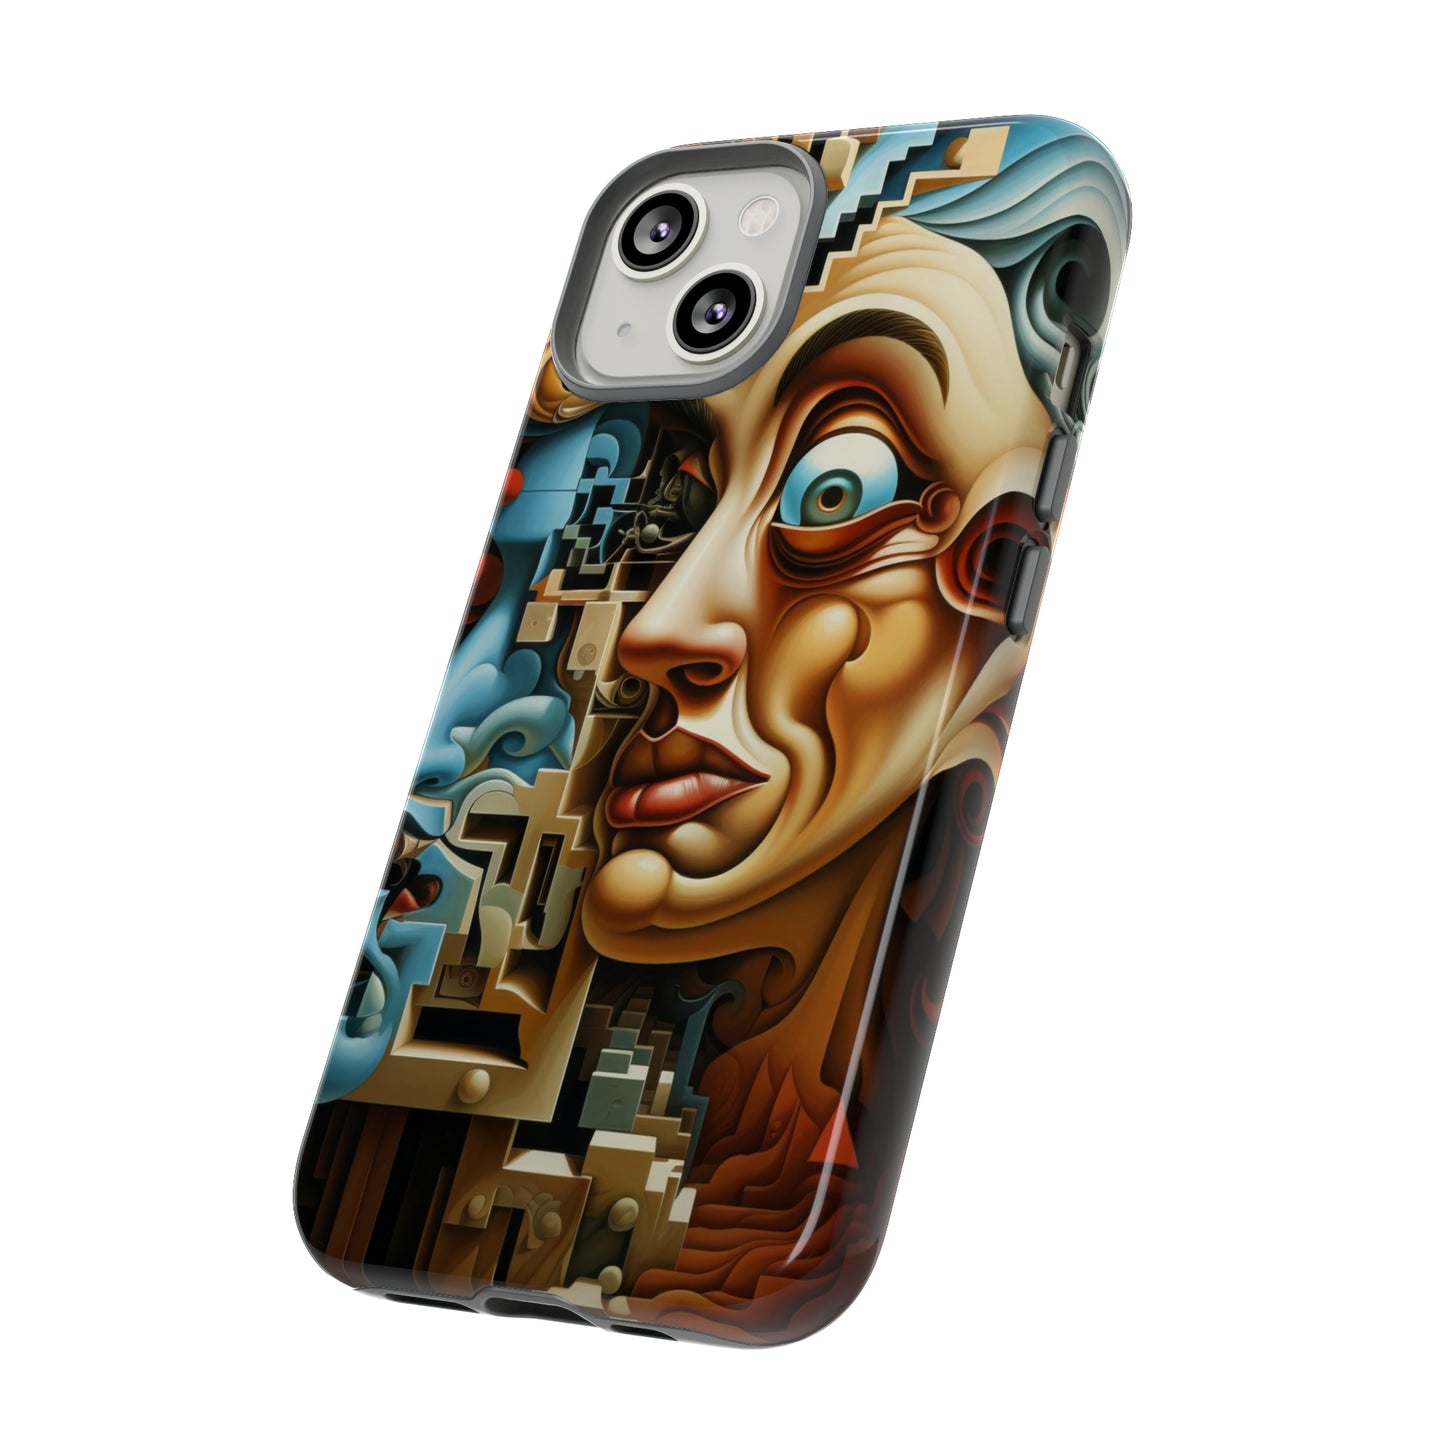 Realities Folded: Surreal Face Fusion Phone Case for iPhone, Samsung, Pixel